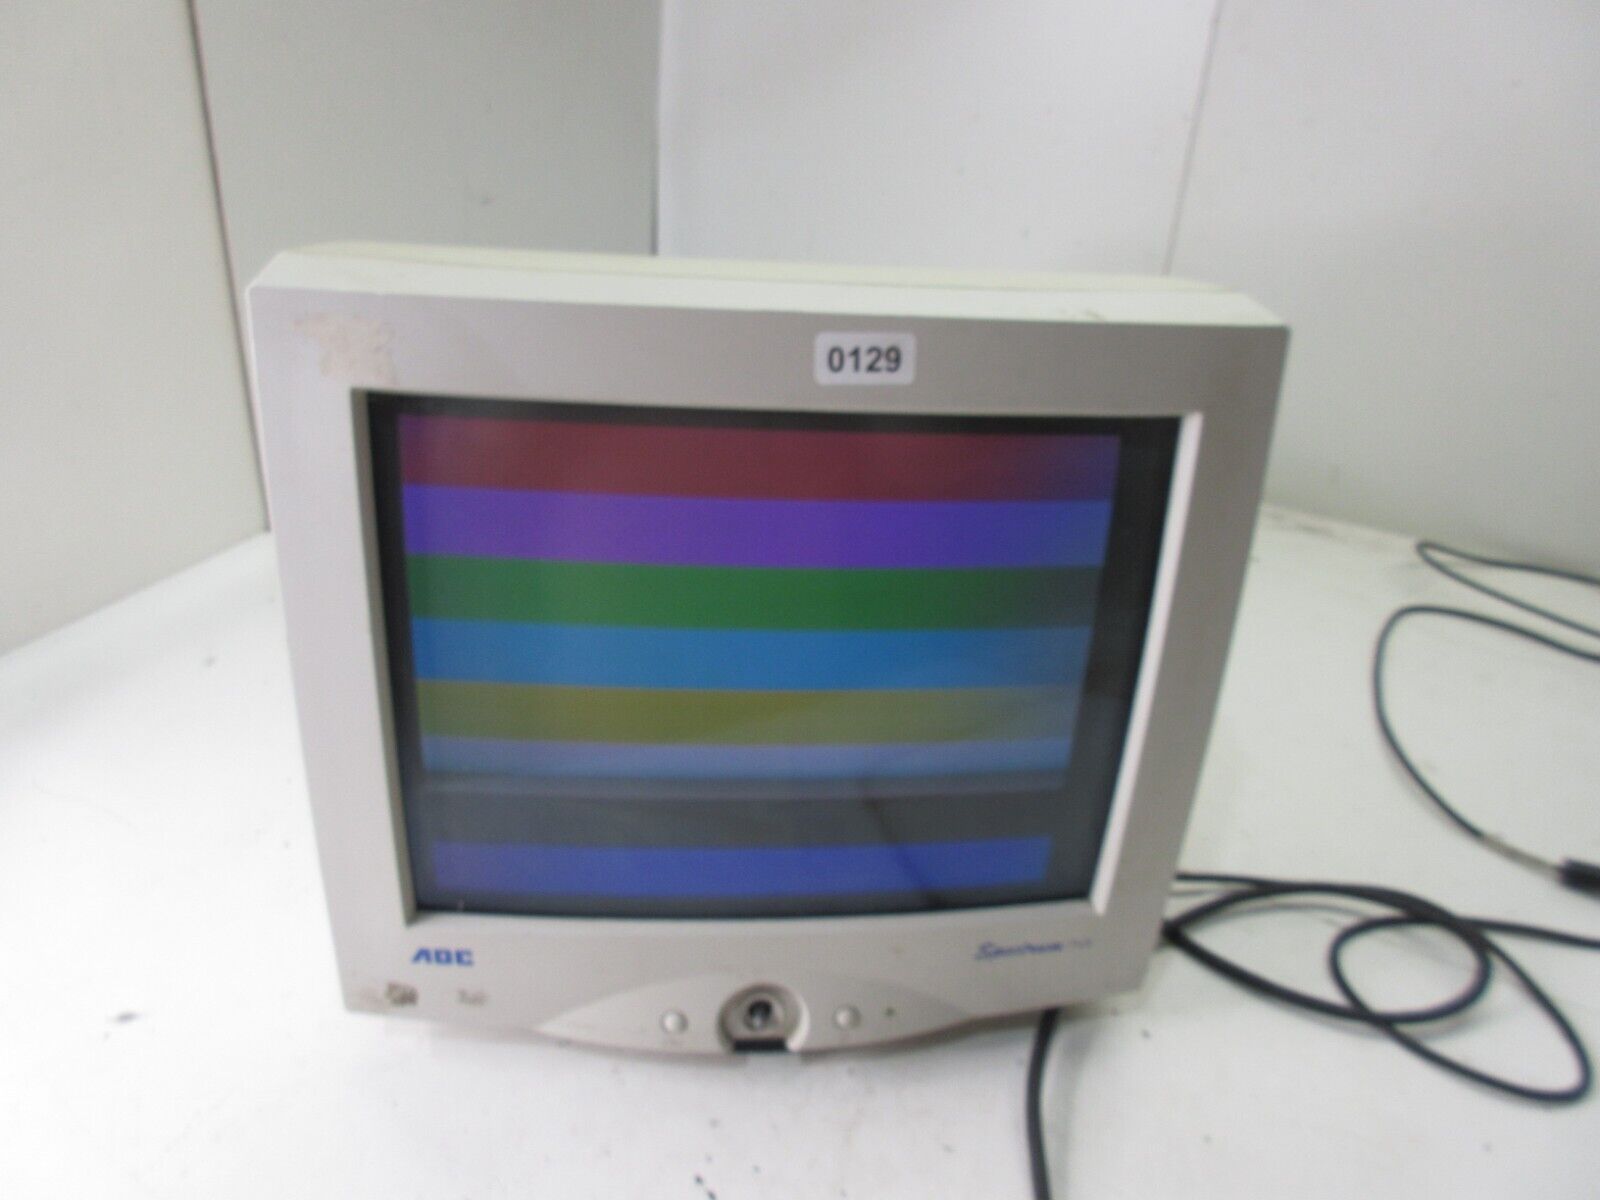 AOC Spectrum 7VLR 16 inch CRT Computer Monitor - No Stand